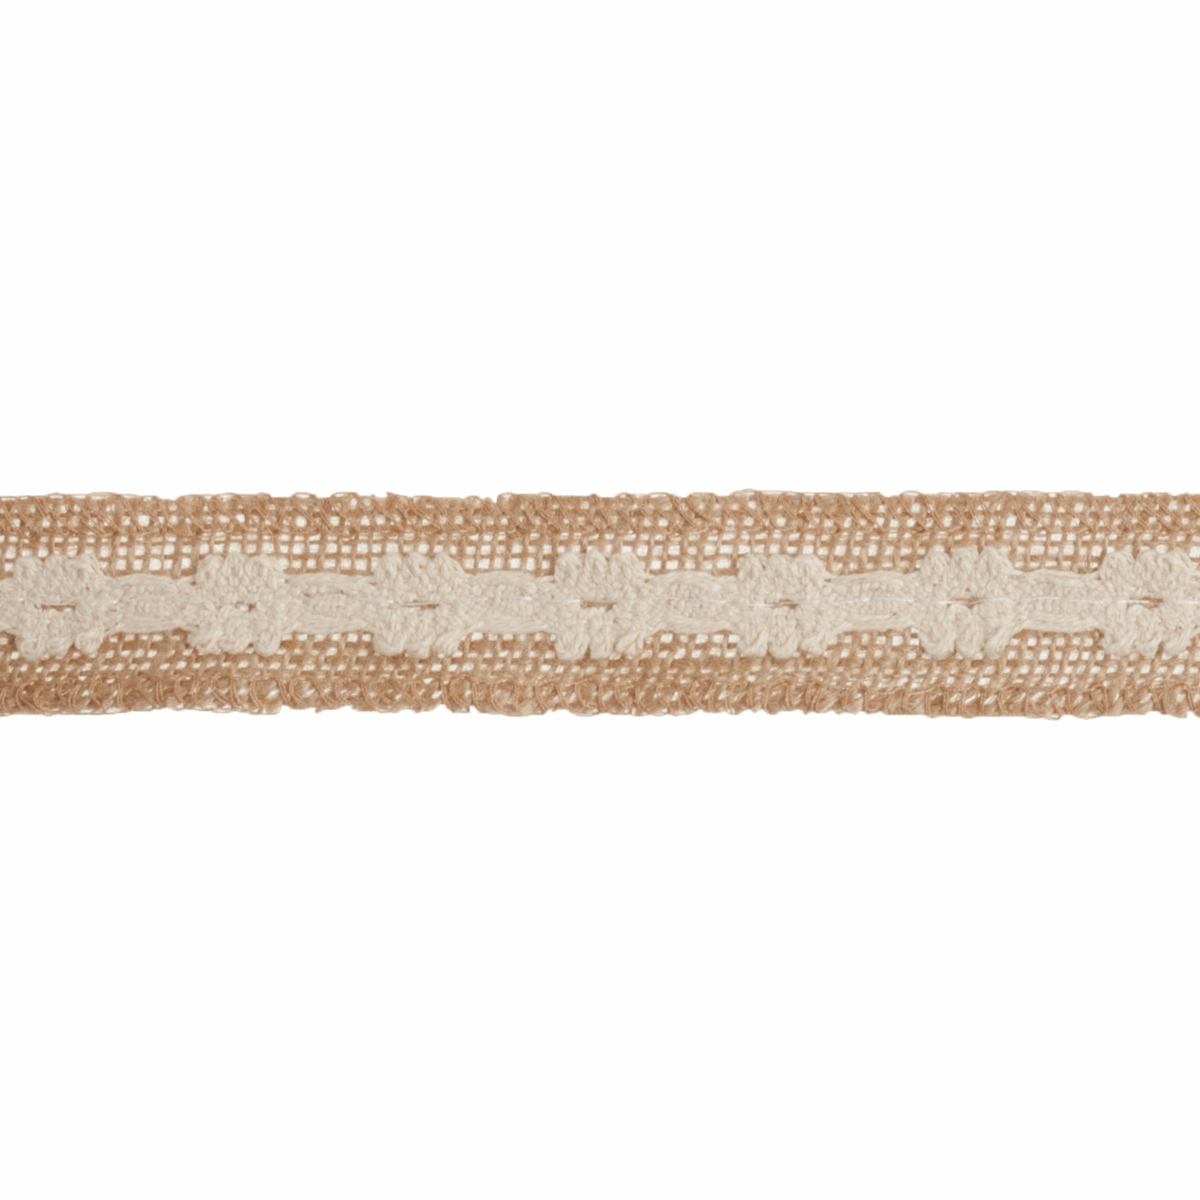 Cotton Trimmed Hessian Fabric Roll - 10m x 28mm Natural